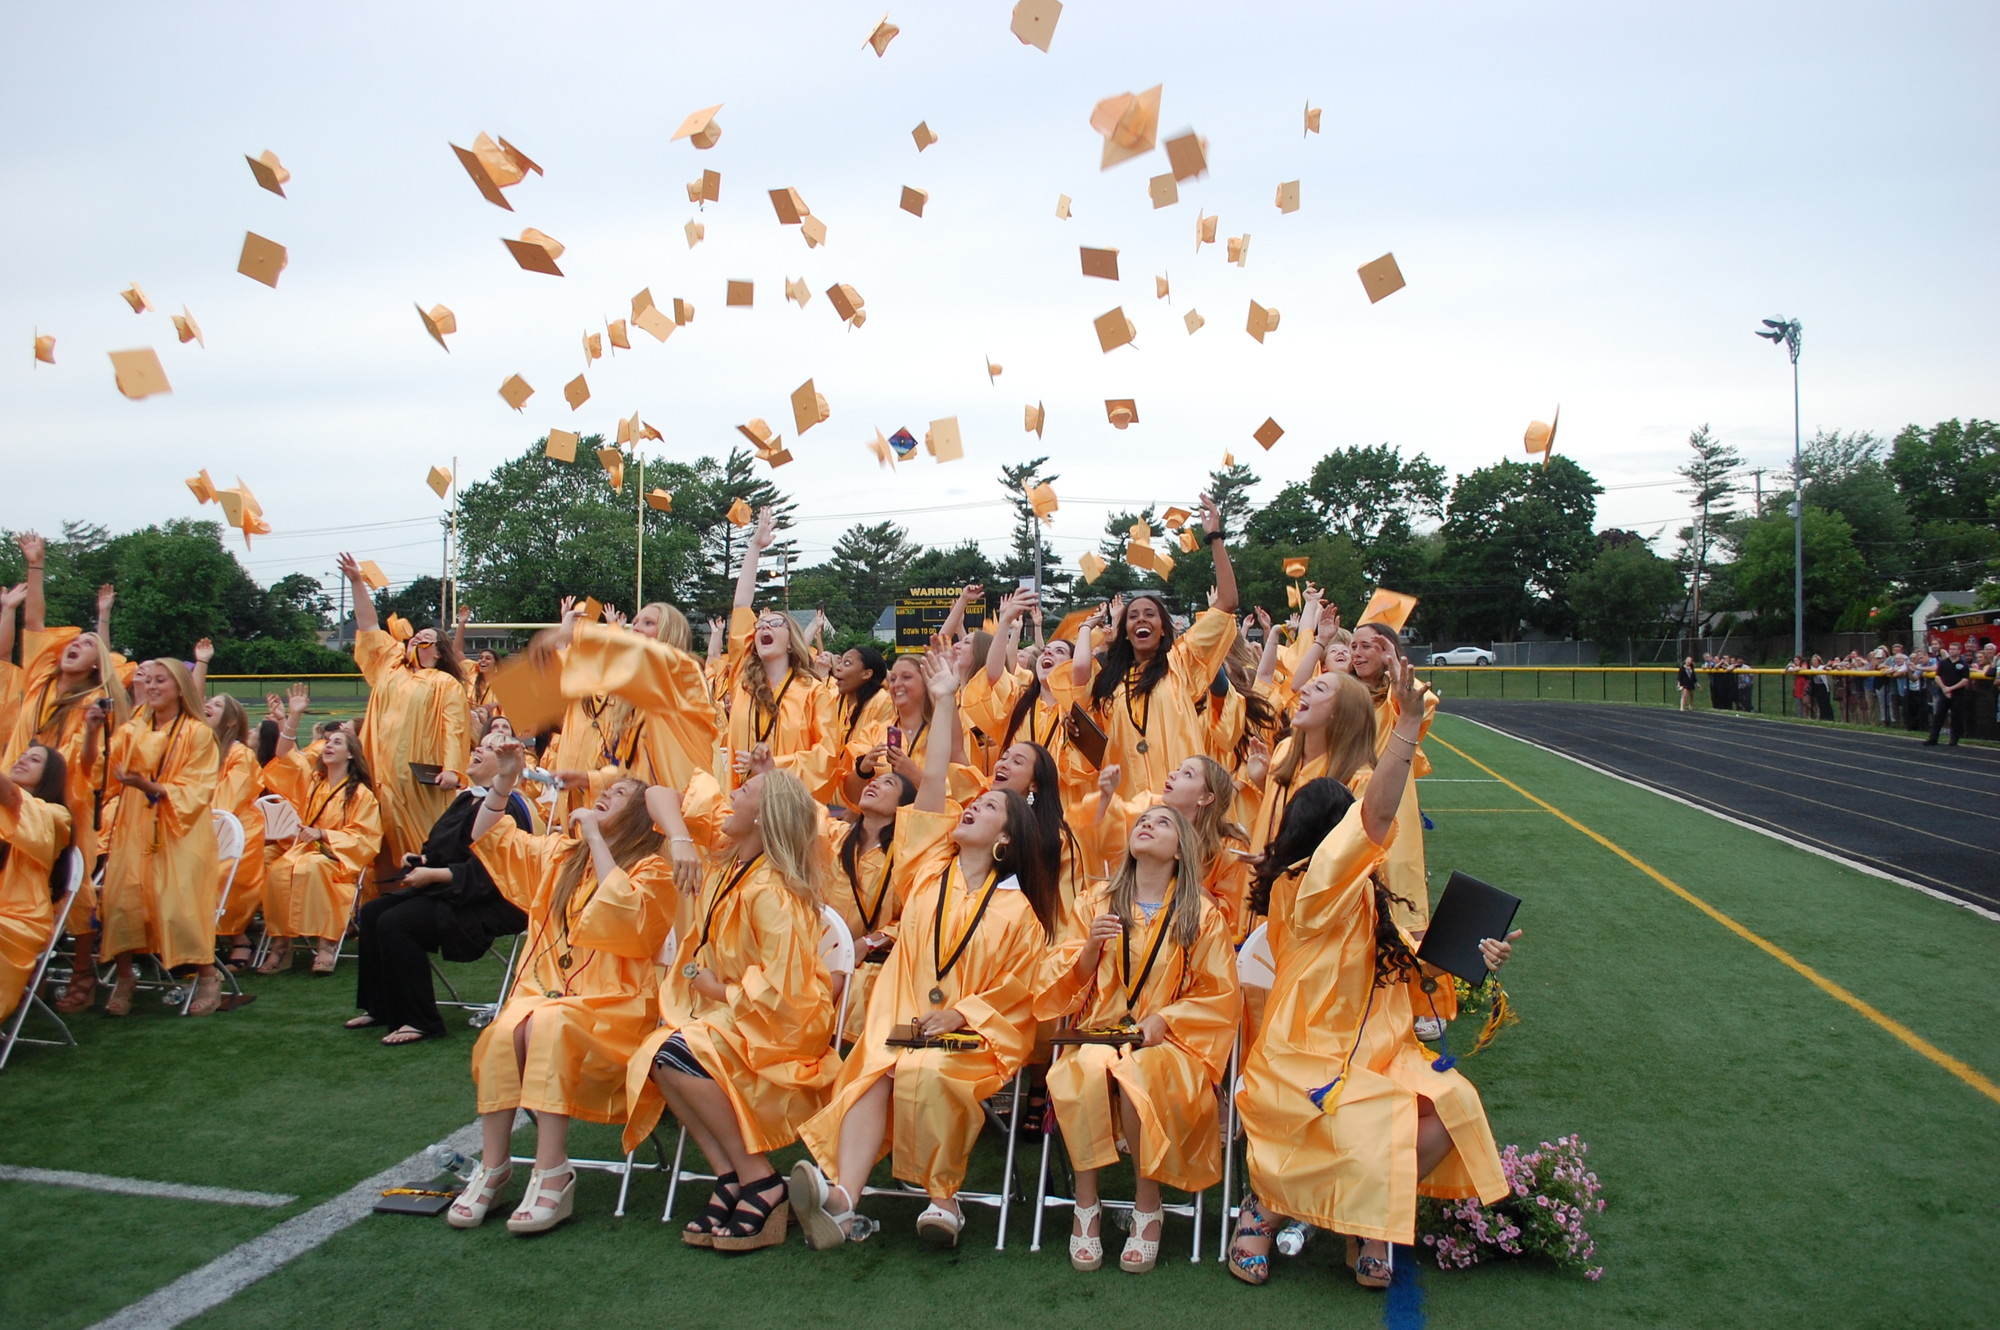 Hats were flying high after the 276 seniors at Wantagh High School were officially declared graduates on June 25.